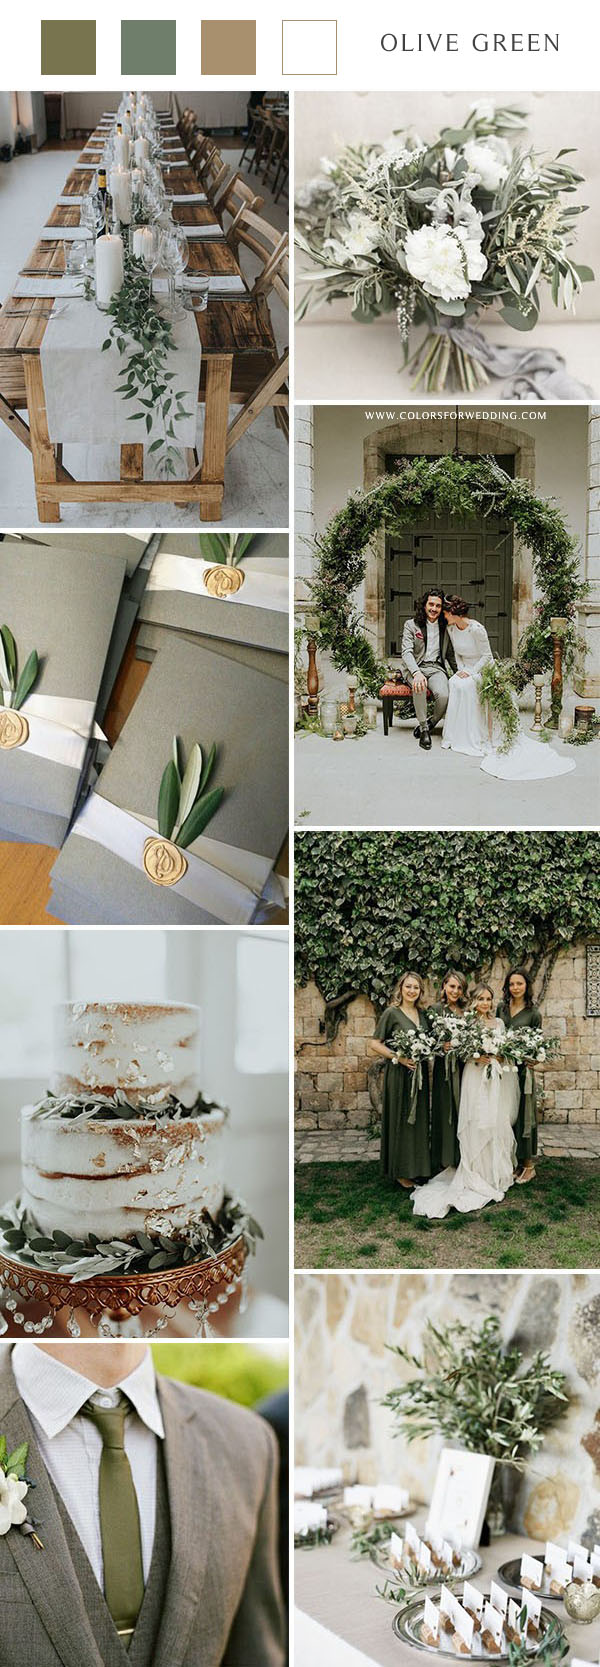 Olive green moody wedding color palette ideas